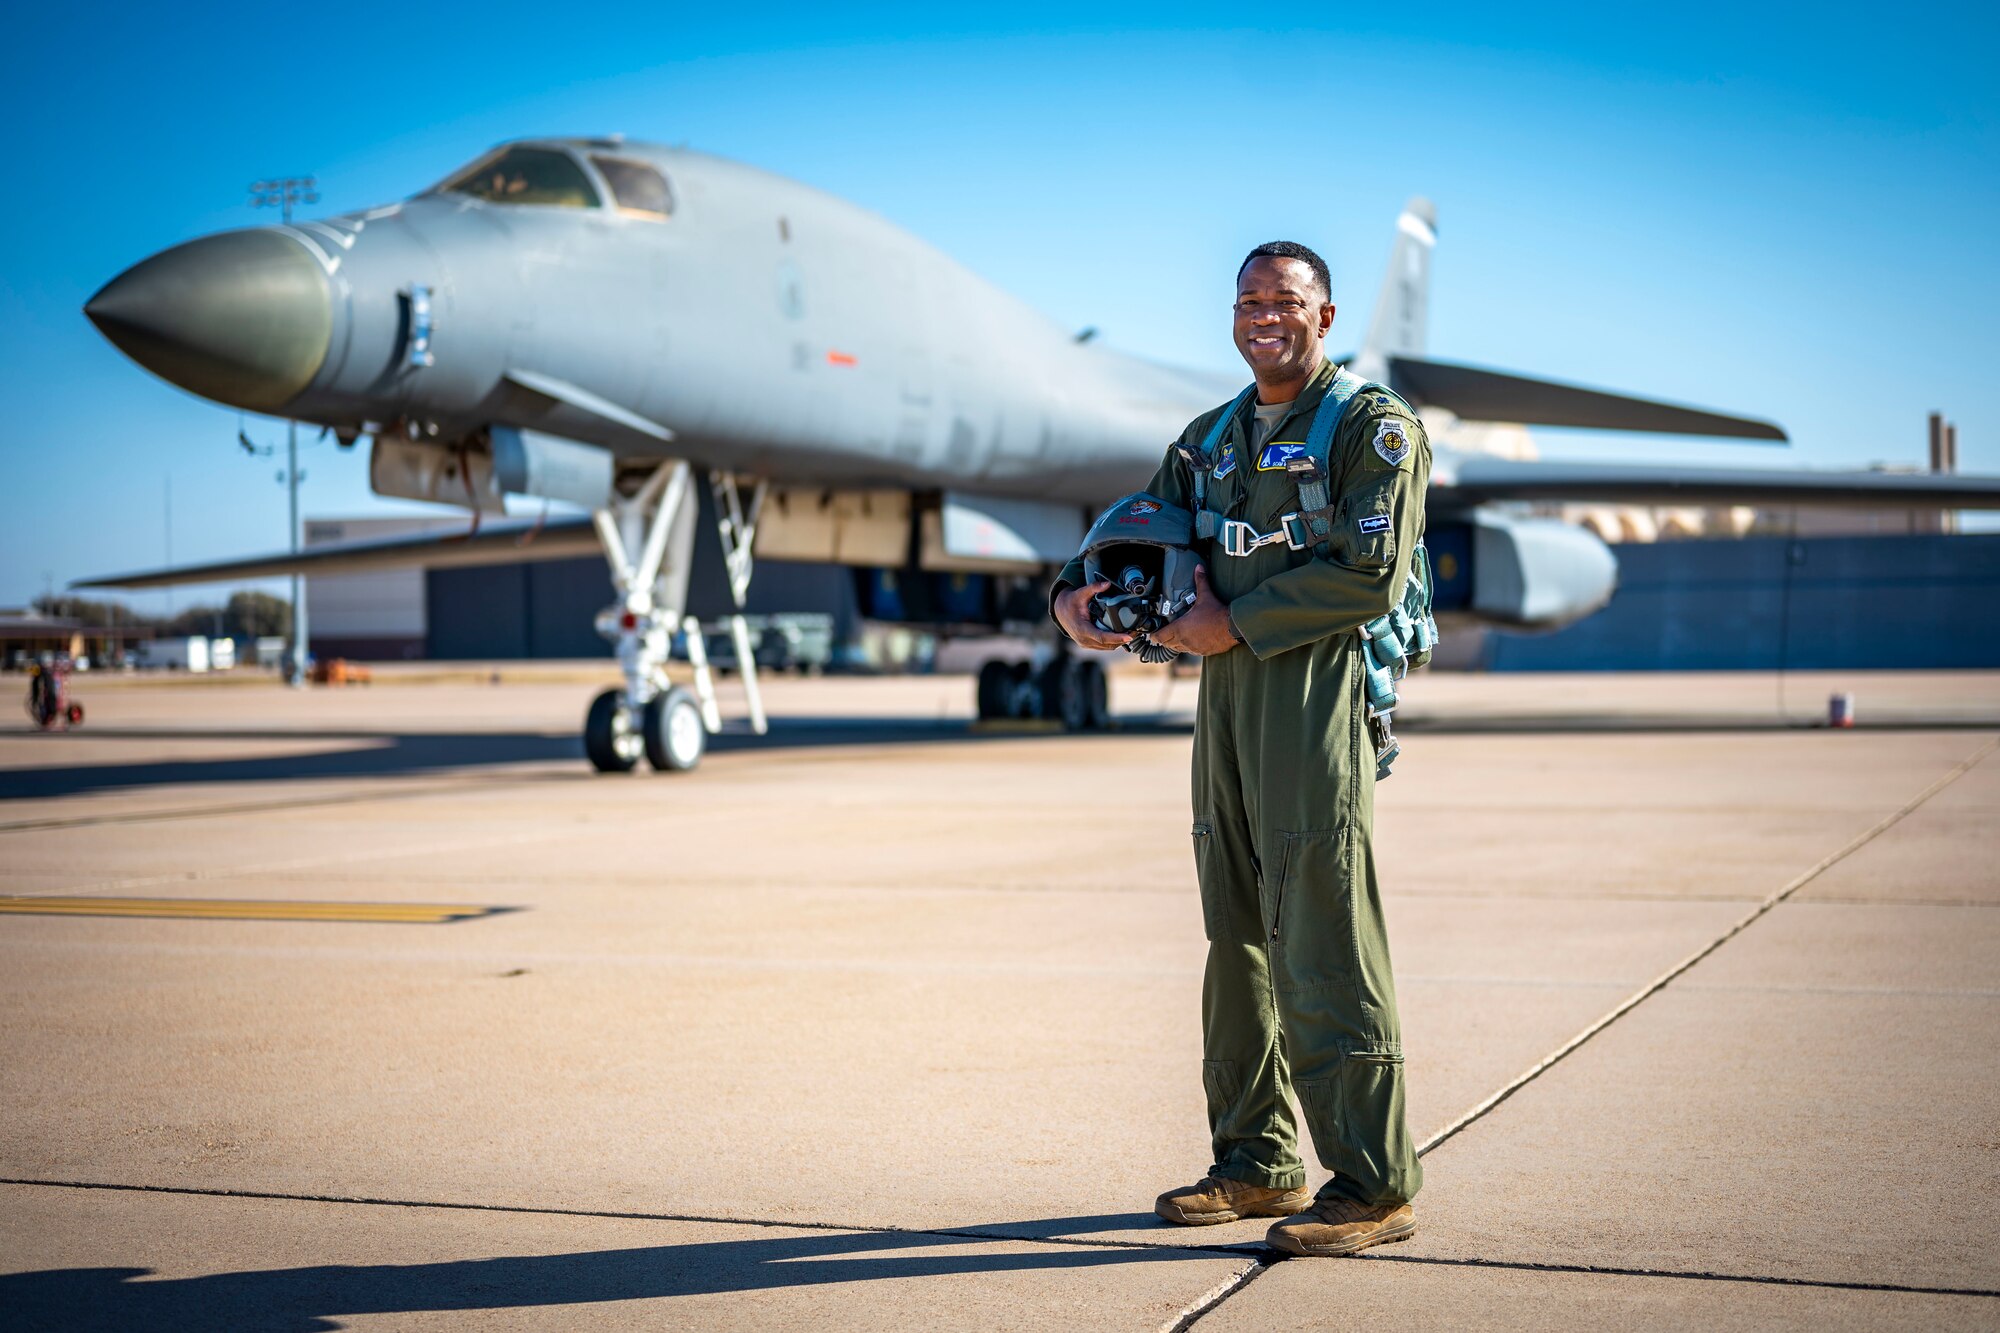 U.S. Air Force Lt. Col Brian Milner, 7th Bomb Wing director of staff, poses in front of a B-1B Lancer during Black History Month at Dyess Air Force Base, Texas, Feb. 15, 2023. Milner was born and raised on the Southside of Chicago. He started his Air Force journey in 2000, enlisting as an electronic warfare maintainer. He earned a Bachelor of Applied Science in Aeronautics from Embry Riddle and commissioned through Officer Training School in 2006. His diverse career has brought much mentorship to both officers and enlisted personnel while continuing forward. (U.S. Air Force photo by Senior Airman Leon Redfern)